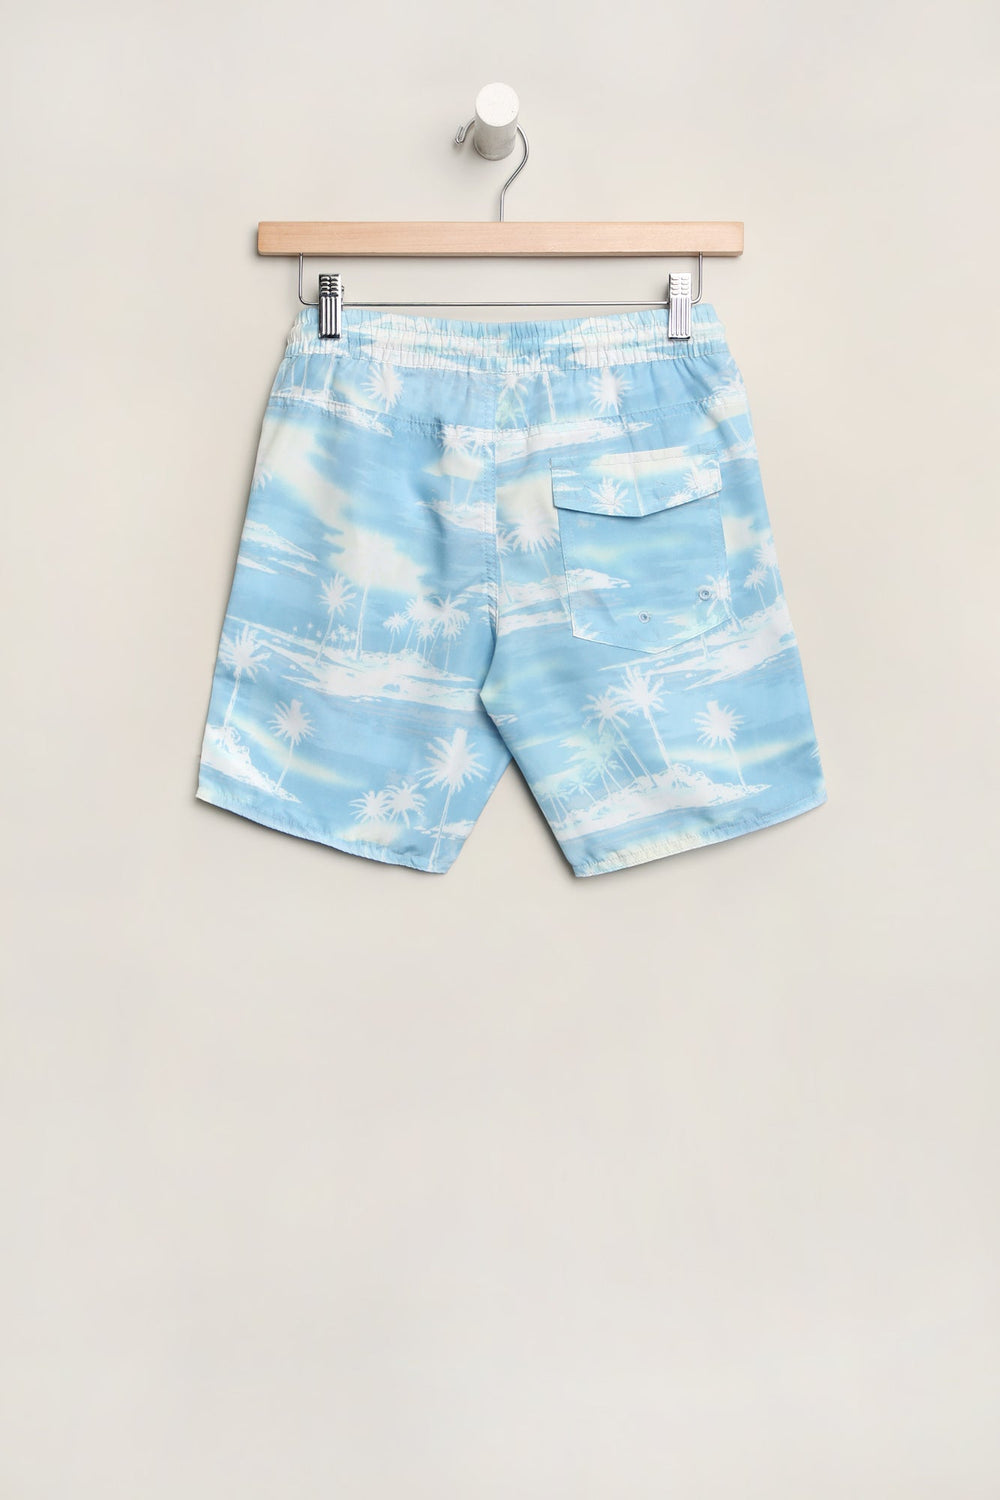 West49 Youth Printed Beach Shorts West49 Youth Printed Beach Shorts